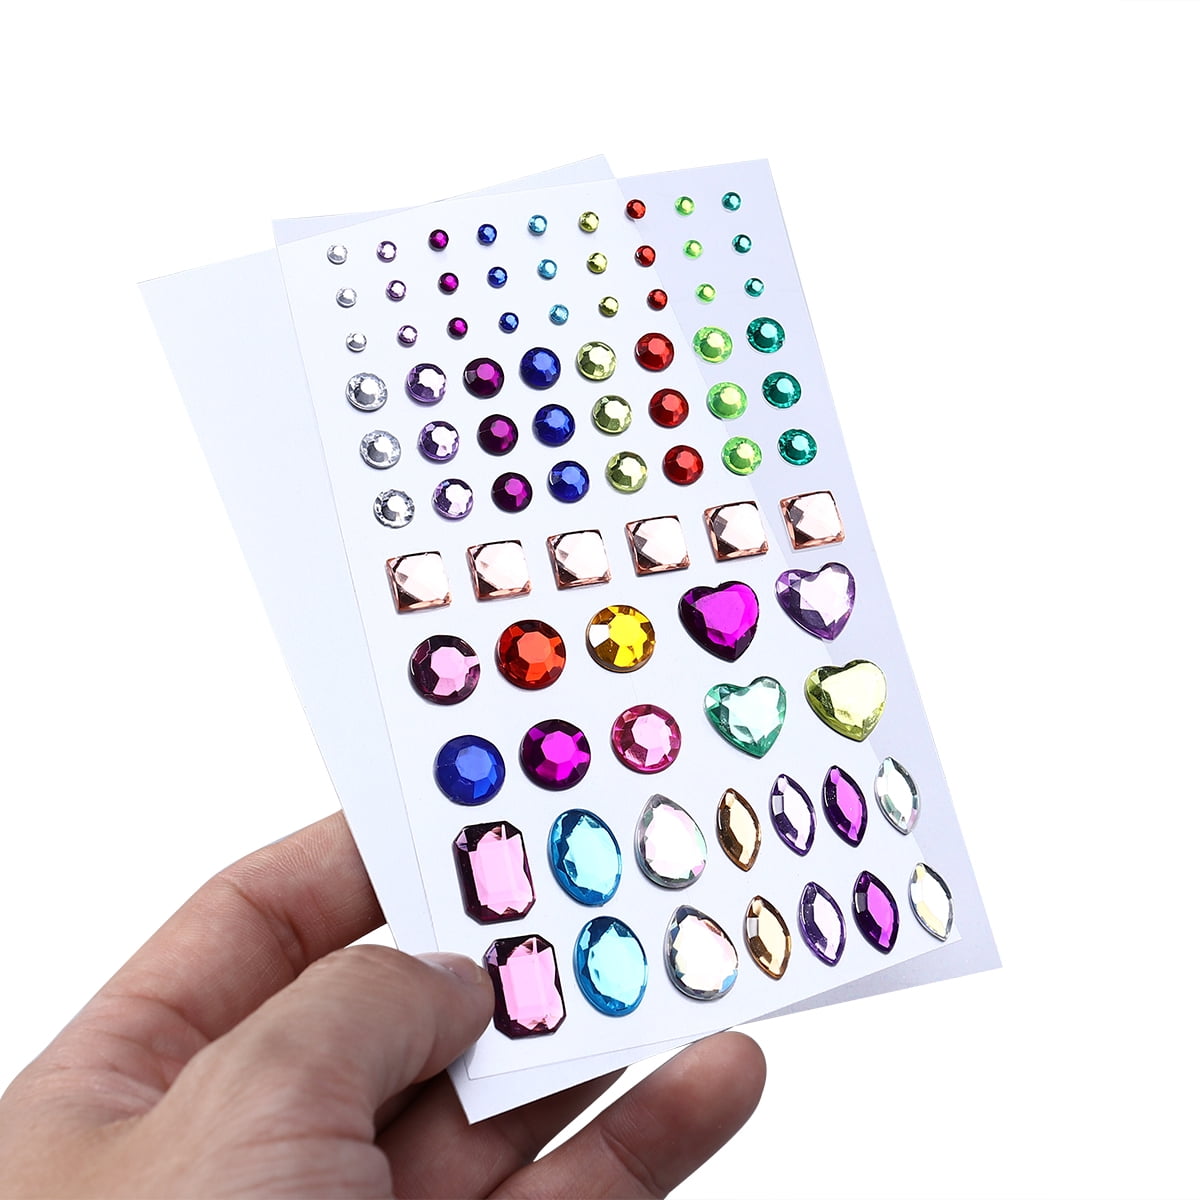 NUOLUX Self-adhesive Acrylic Crystal Rhinestone Jewels Gems Sticker Sheets  Assorted Various Shapes (Sky Blue)